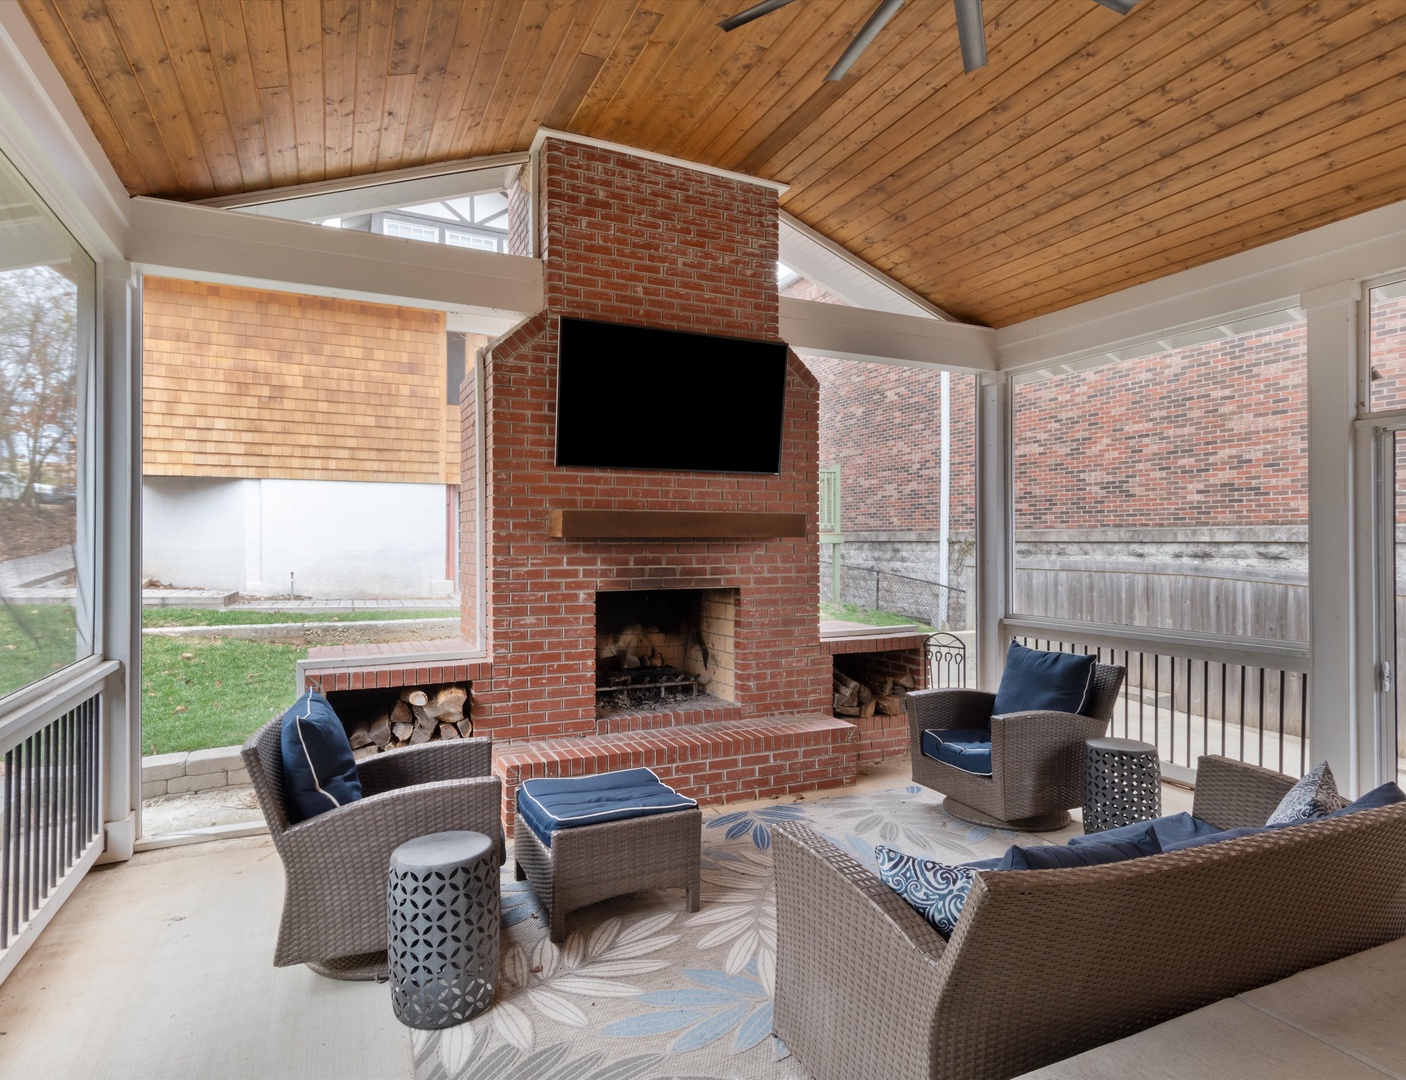 Come together and enjoy the ambiance of the outdoor fireplace and TV